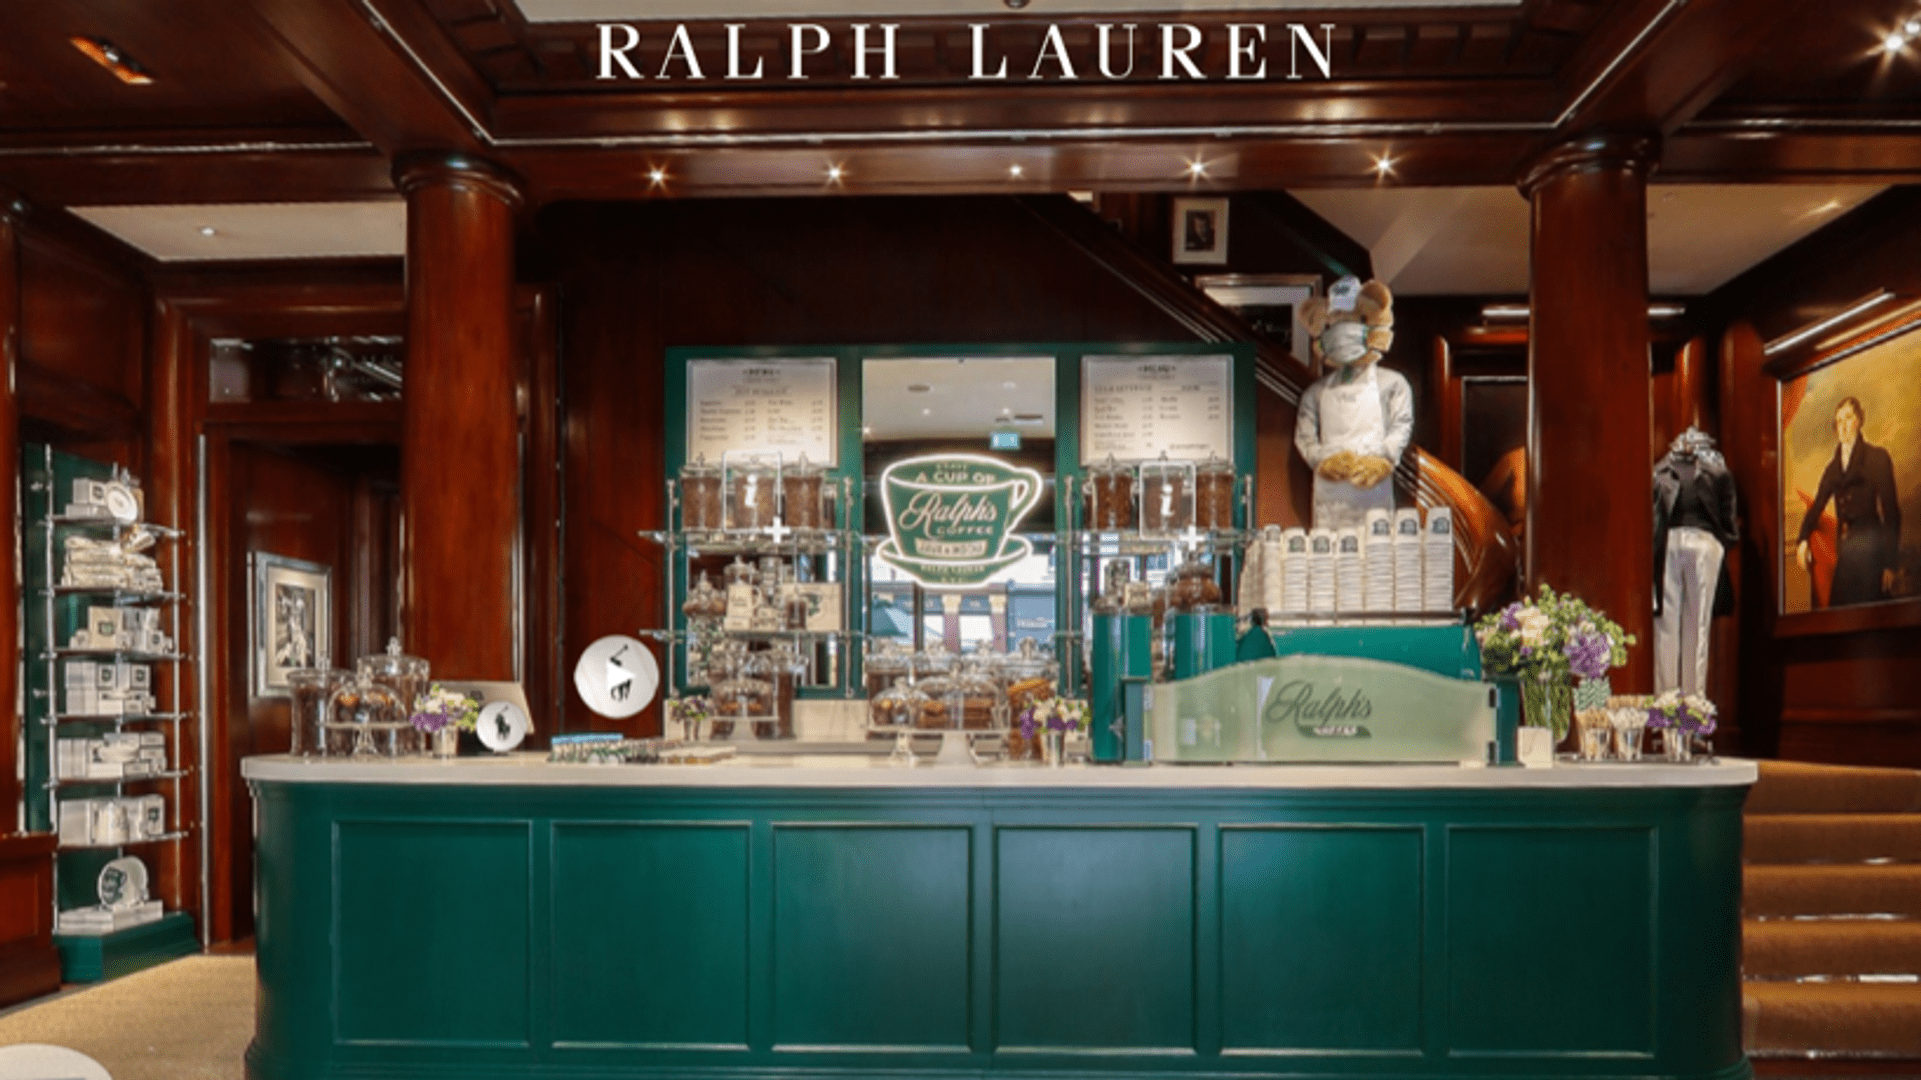 Polo Ralph Lauren's immersive retail experience transports customers to  Centre Court for Wimbledon collection eyewear